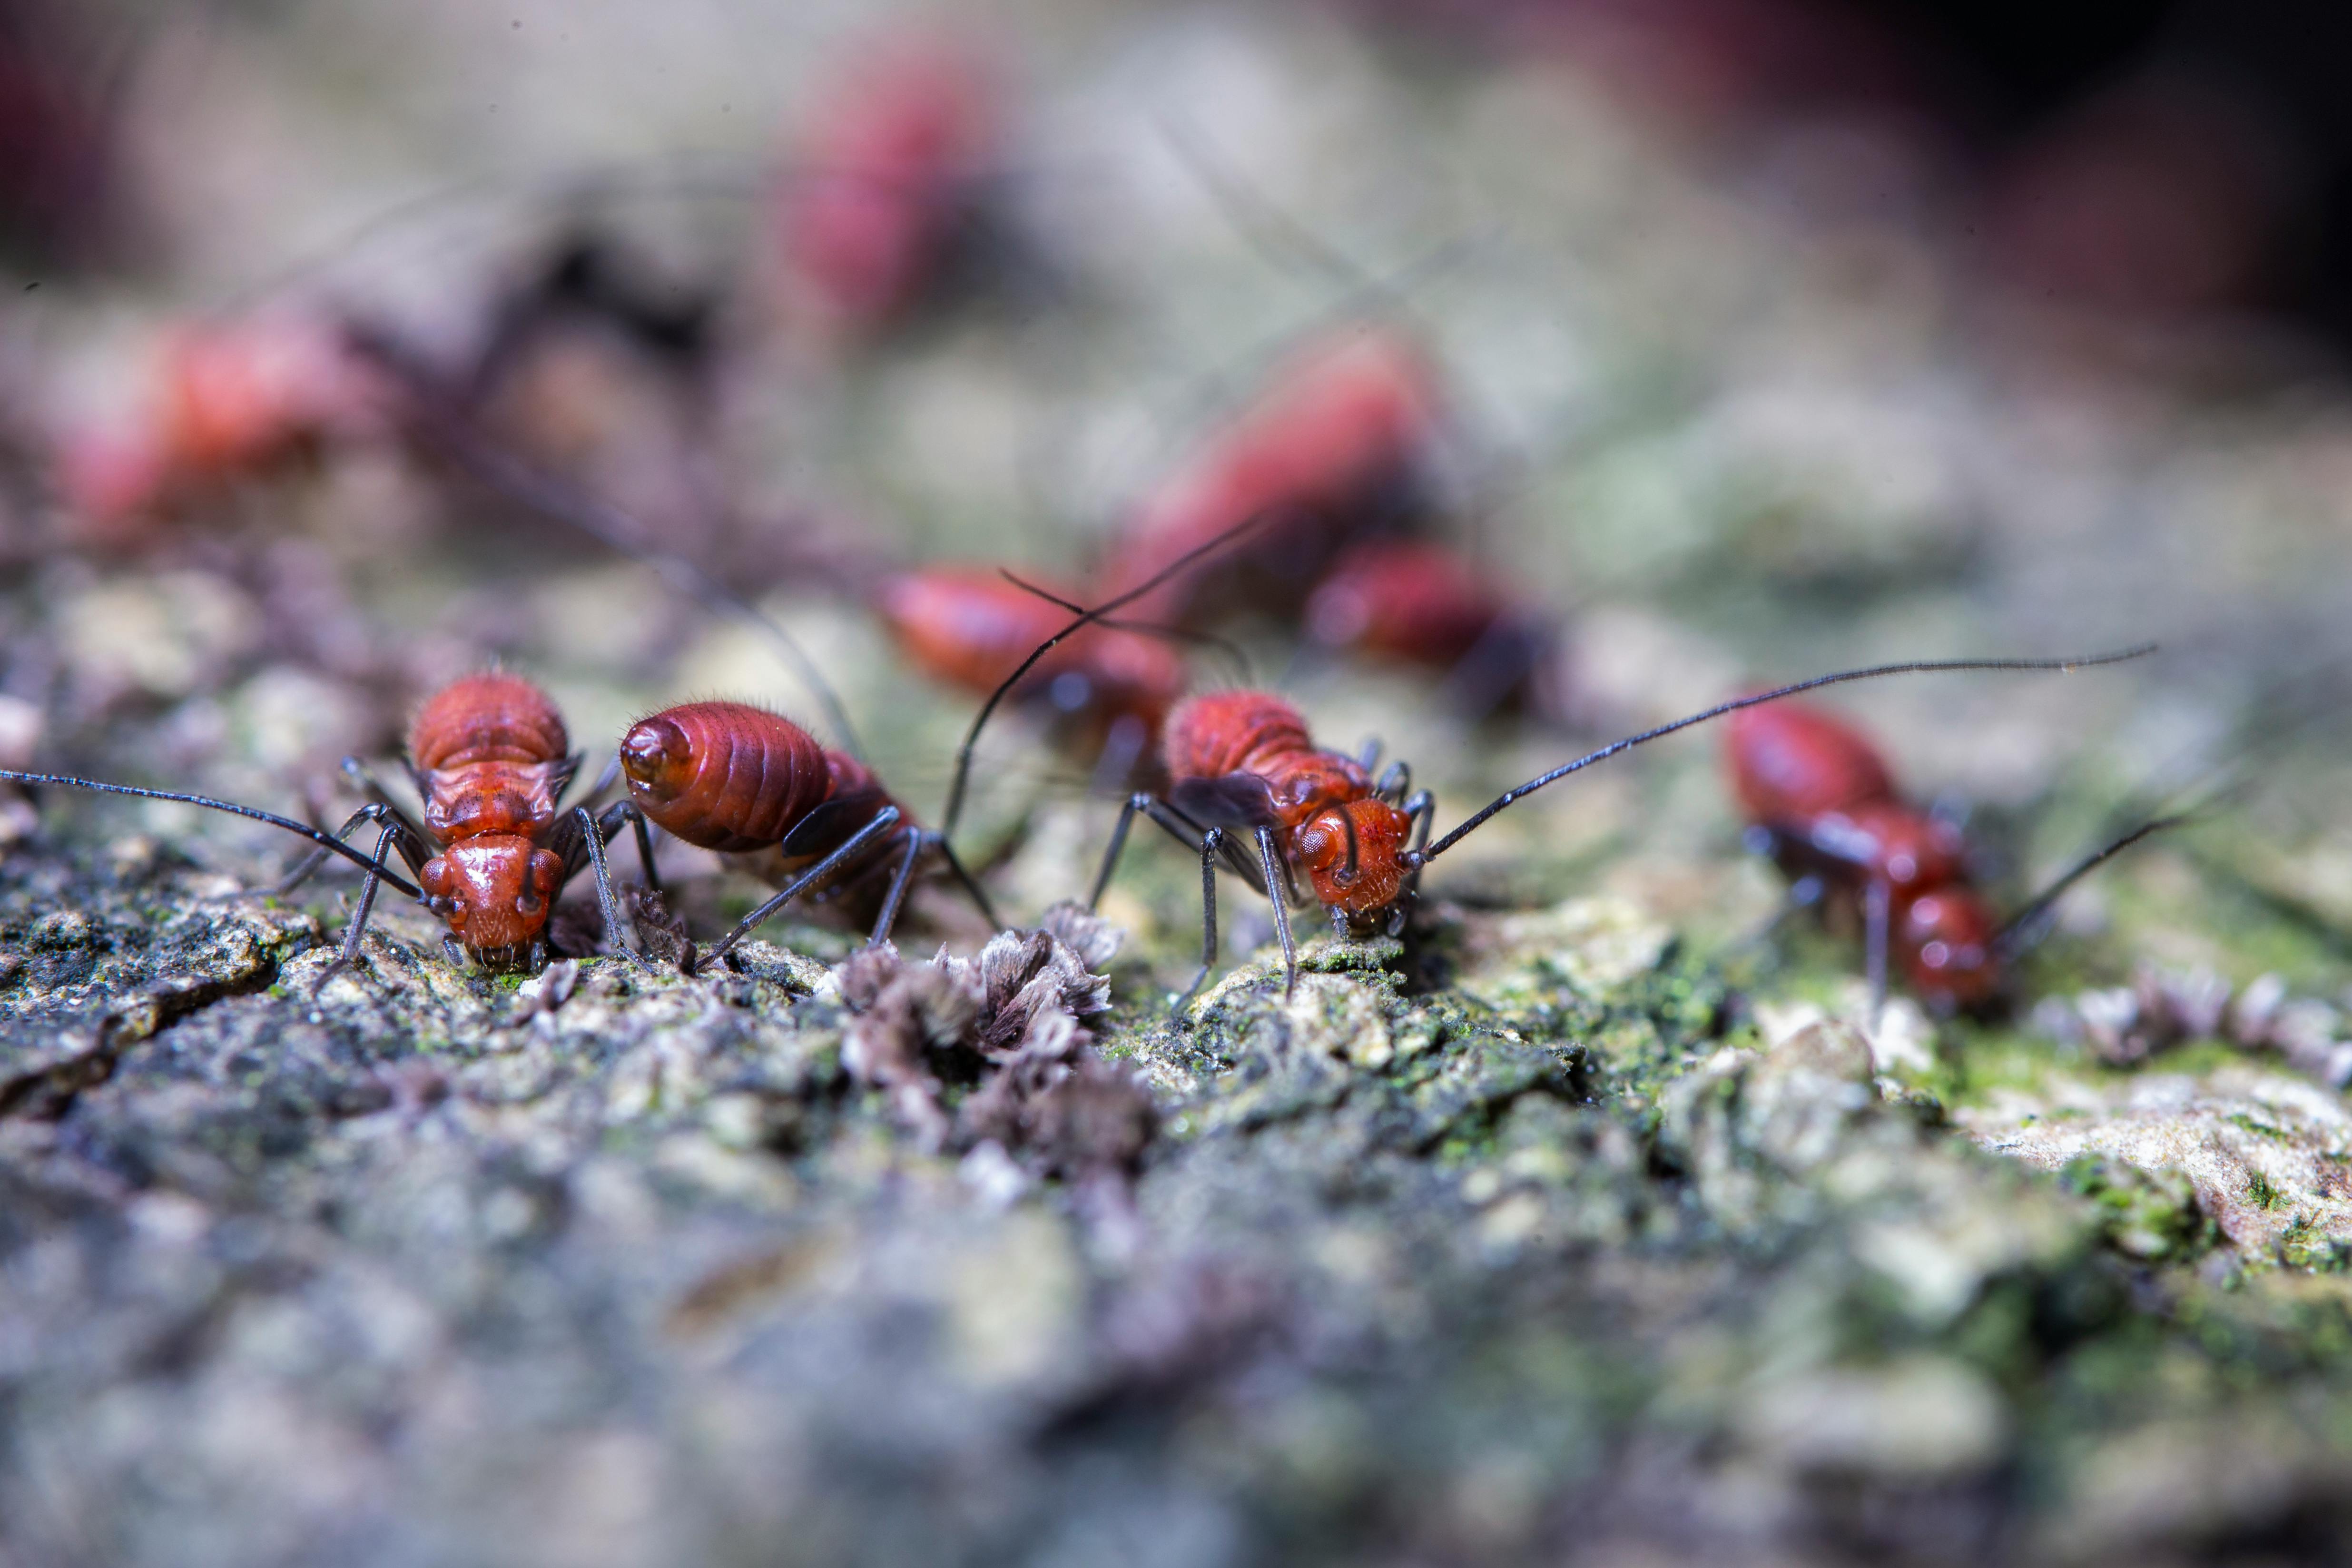 Ant Control Experts in Georgetown, TX